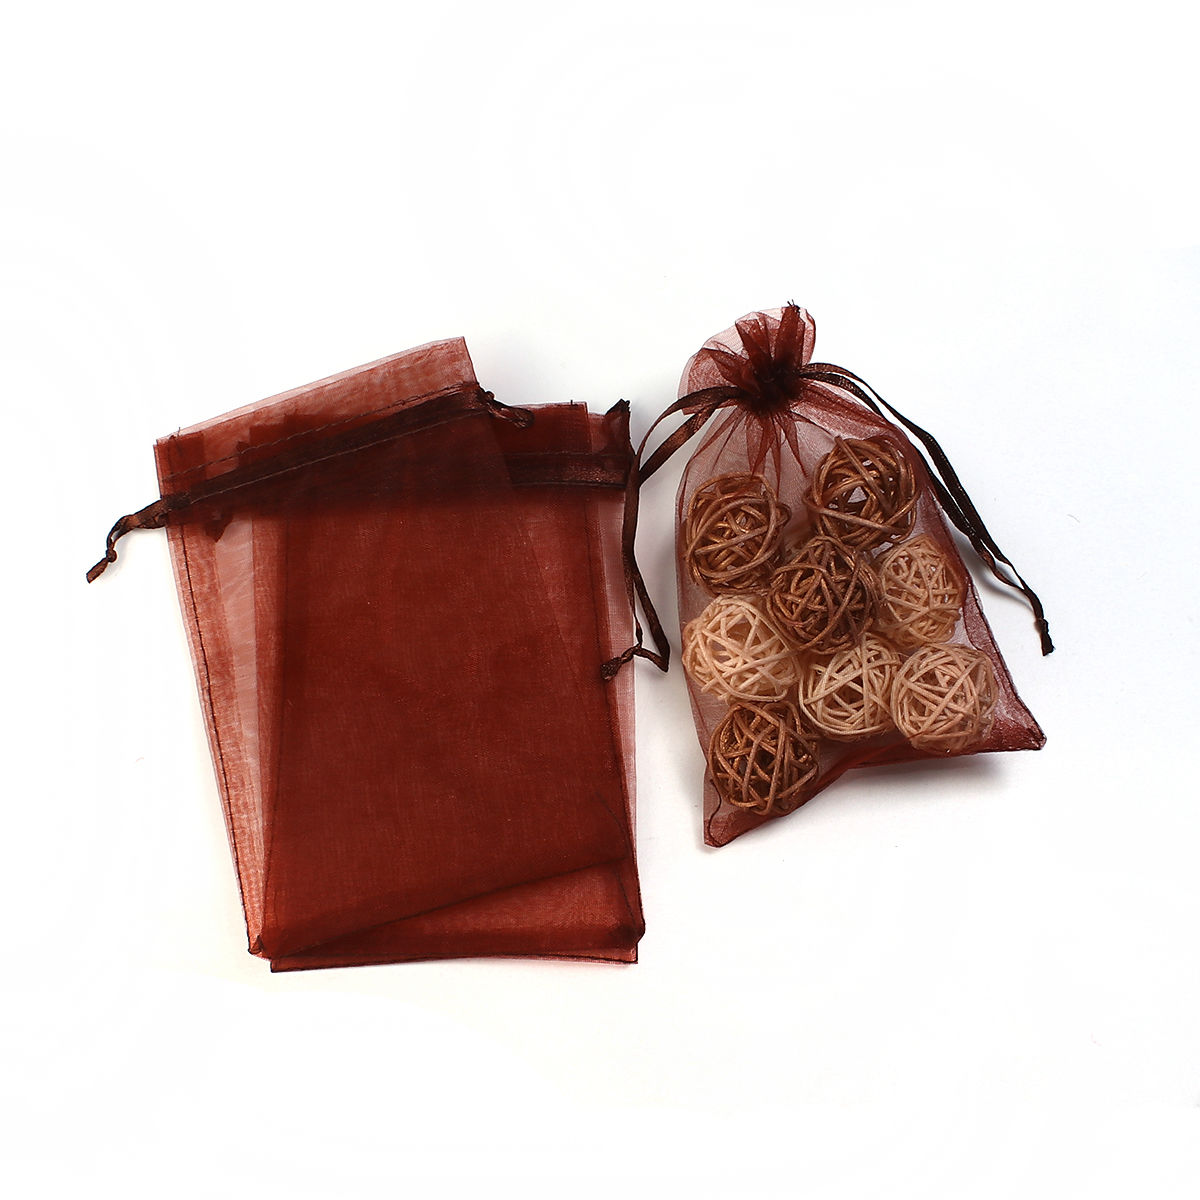 Picture of Wedding Gift Organza Jewelry Bags Drawstring Rectangle Coffee (Usable Space: 13x10cm) 15cm(5 7/8") x 10cm(3 7/8"), 20 PCs